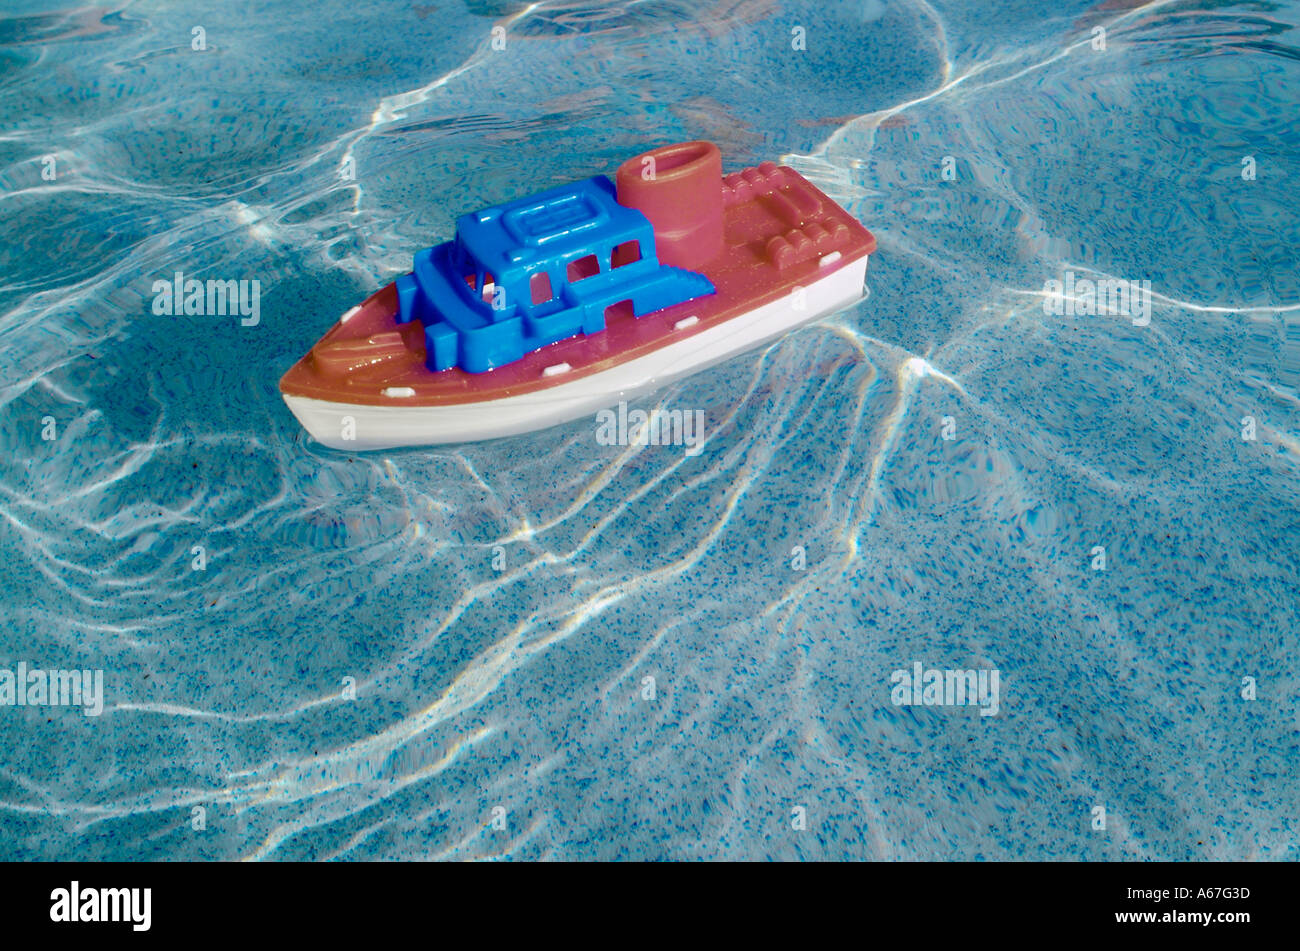 Toy Plastic Boat In Swimming Pool Water Toys Boats Boating Stock Photo